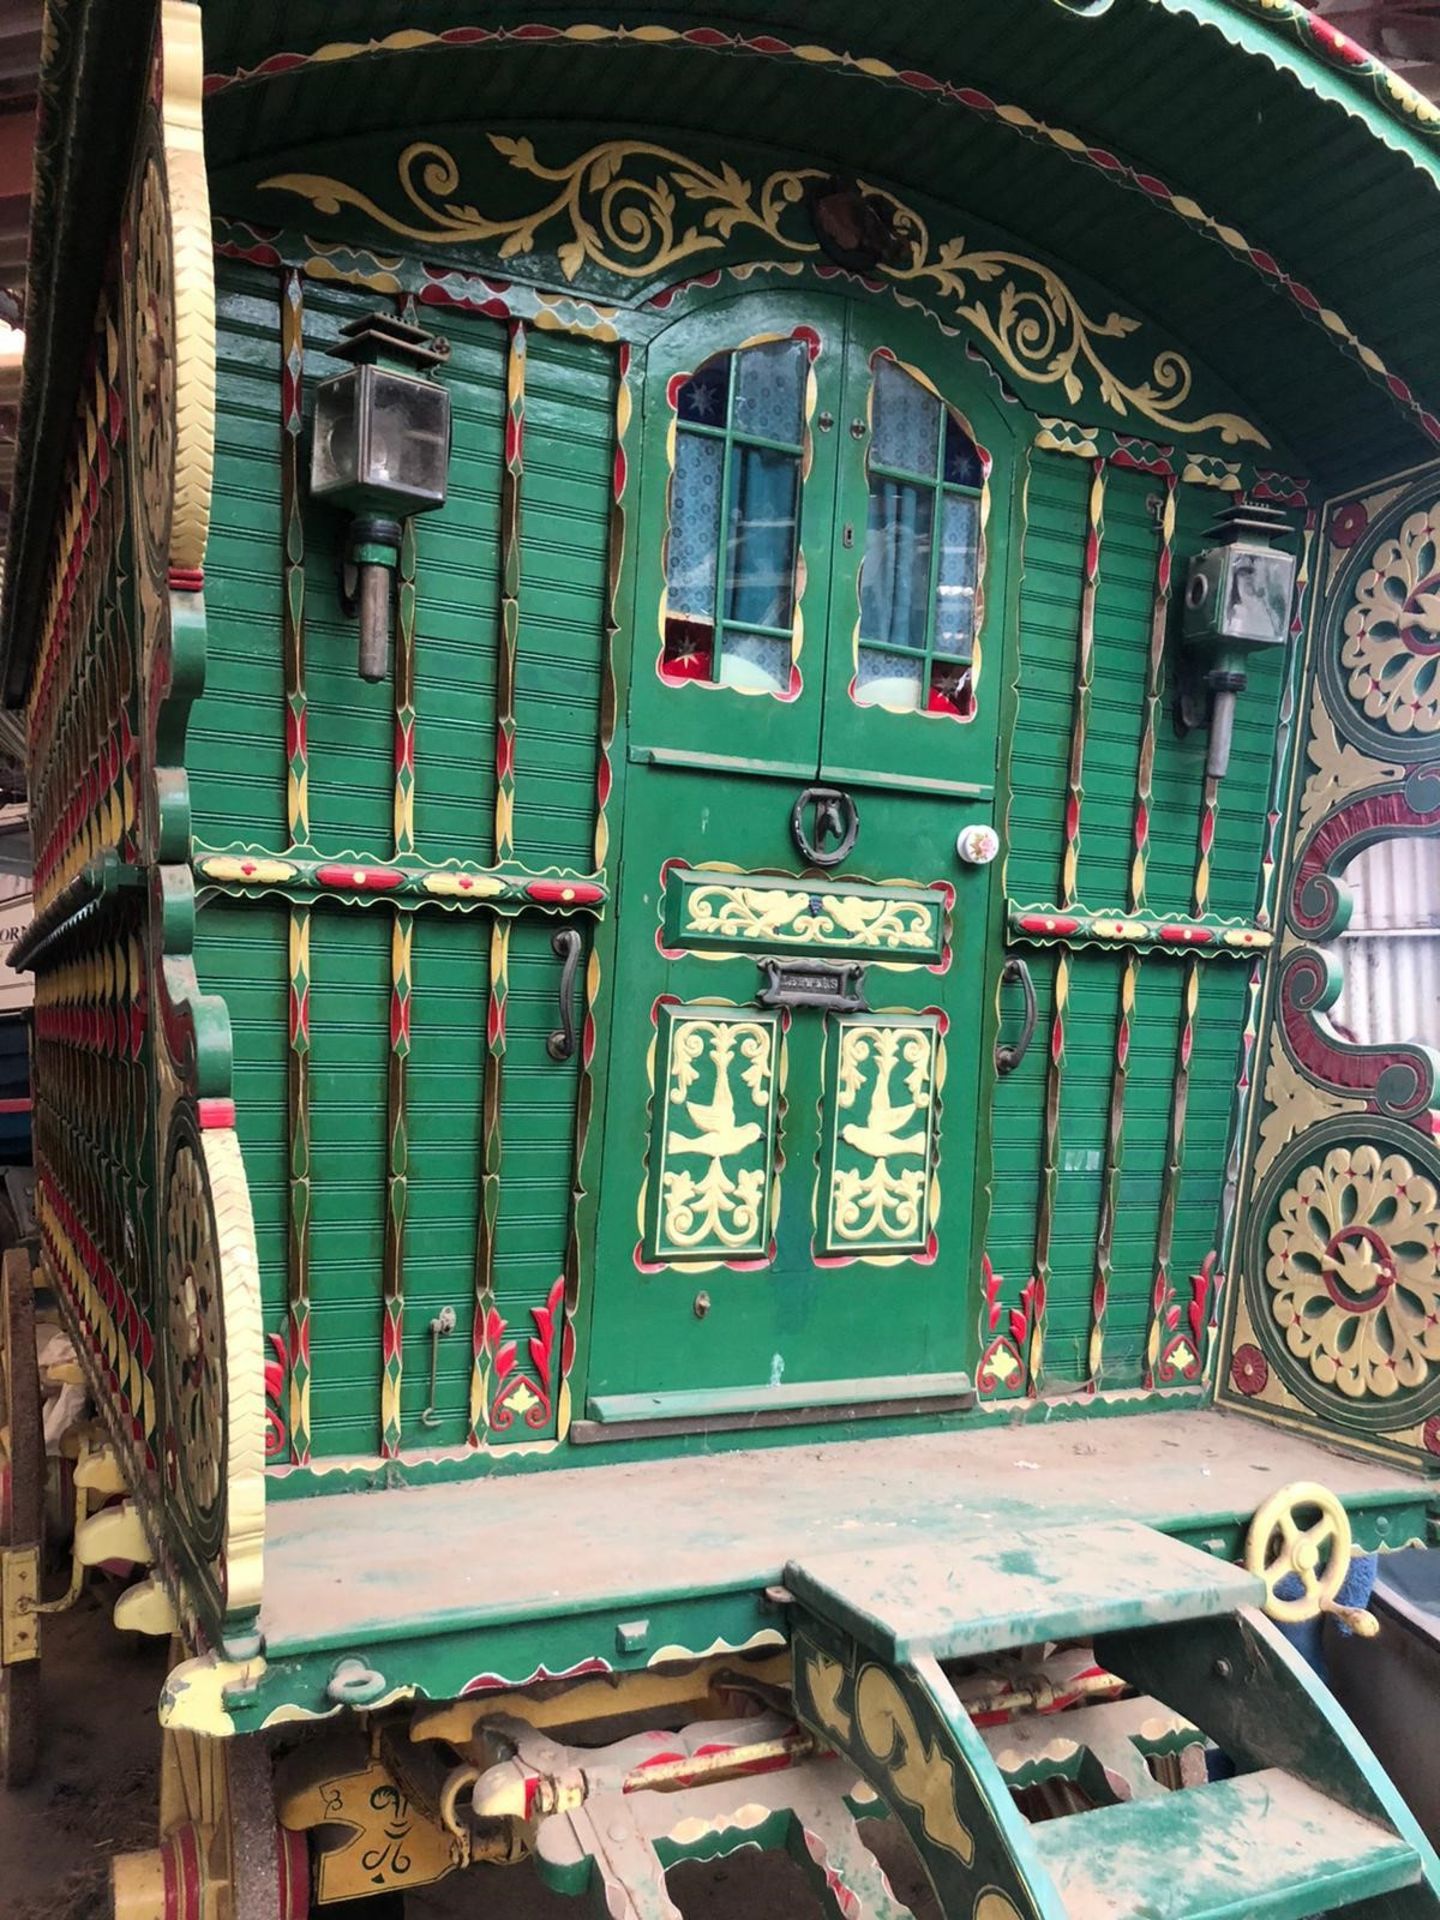 READING WAGON, painted dark green with cream and maroon decoration on a cream painted undercarriage. - Image 8 of 22